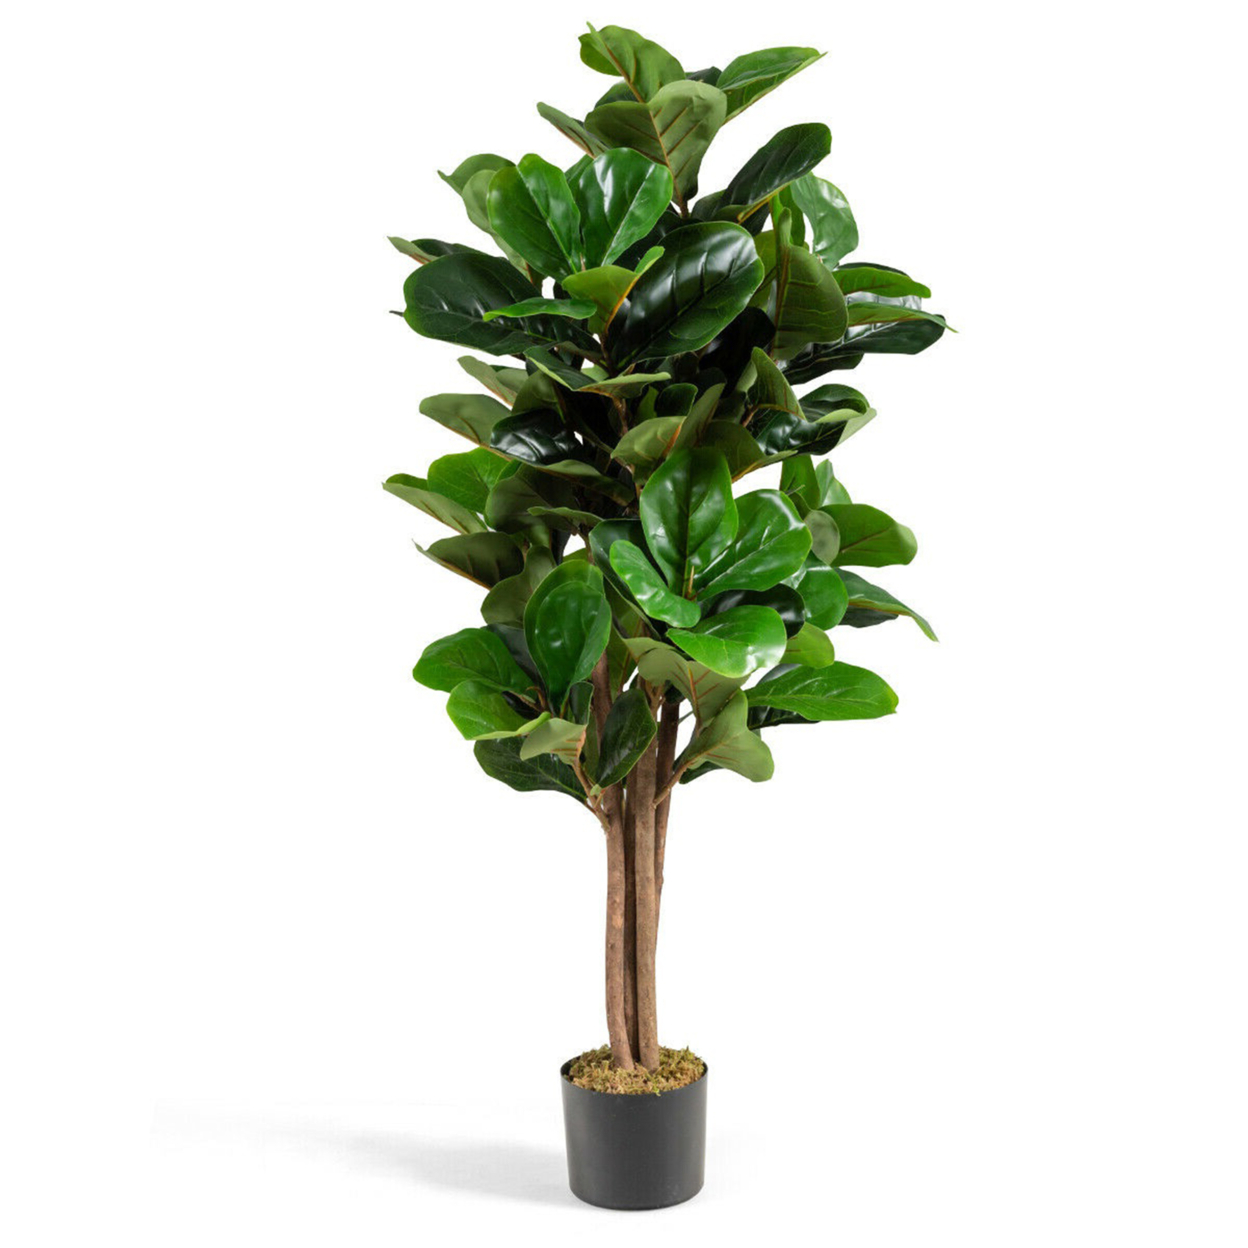 4Ft Fiddle Leaf Fig Tree Artificial Greenery Plant Home Office Decoration